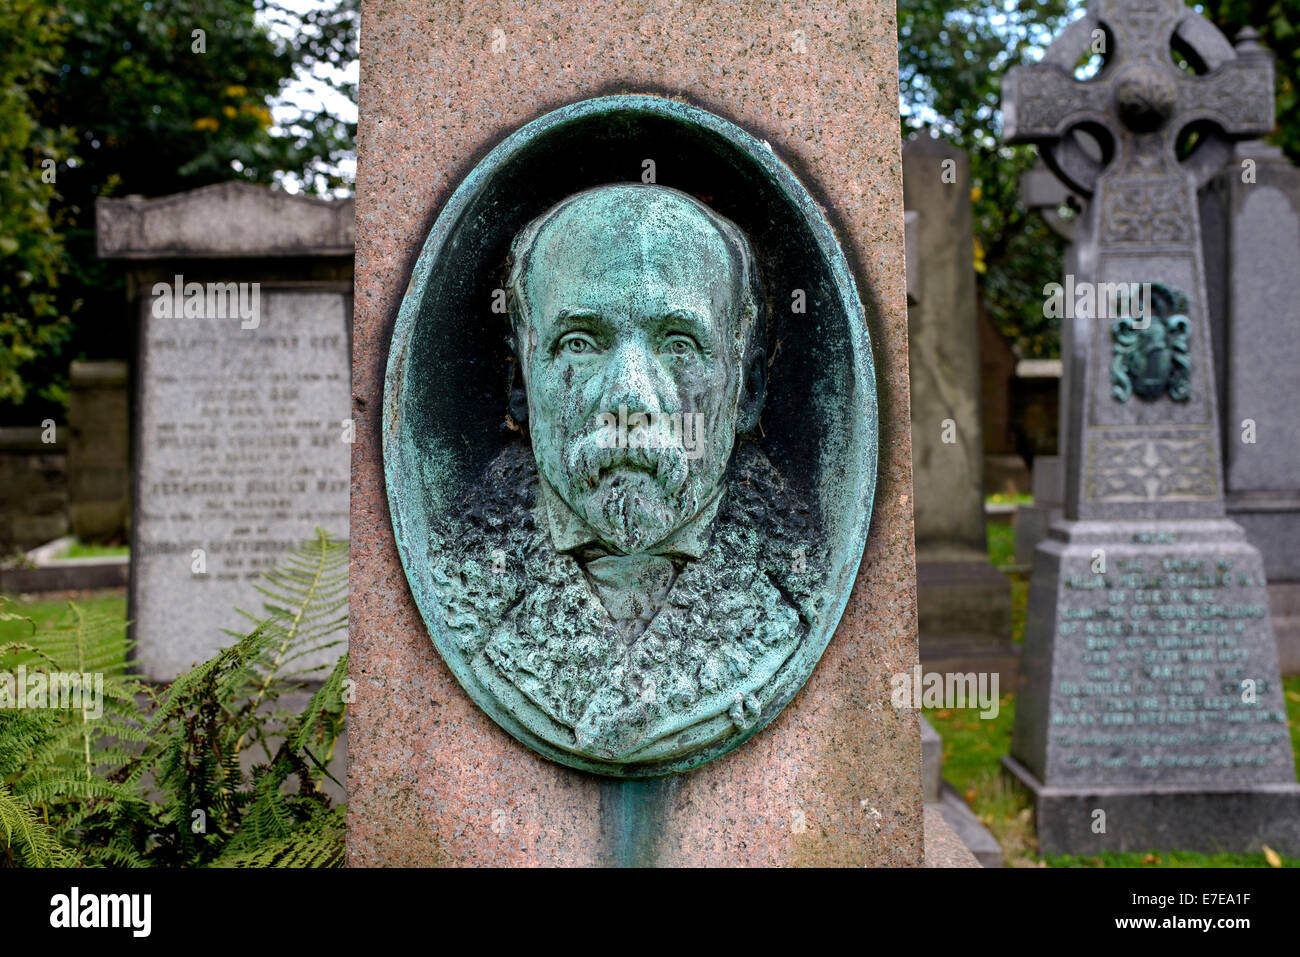 Detail from the Grave of John Anderson (4 October 1833 – 15 August 1900) who was a Scottish anatomist and zoologist. Stock Photo